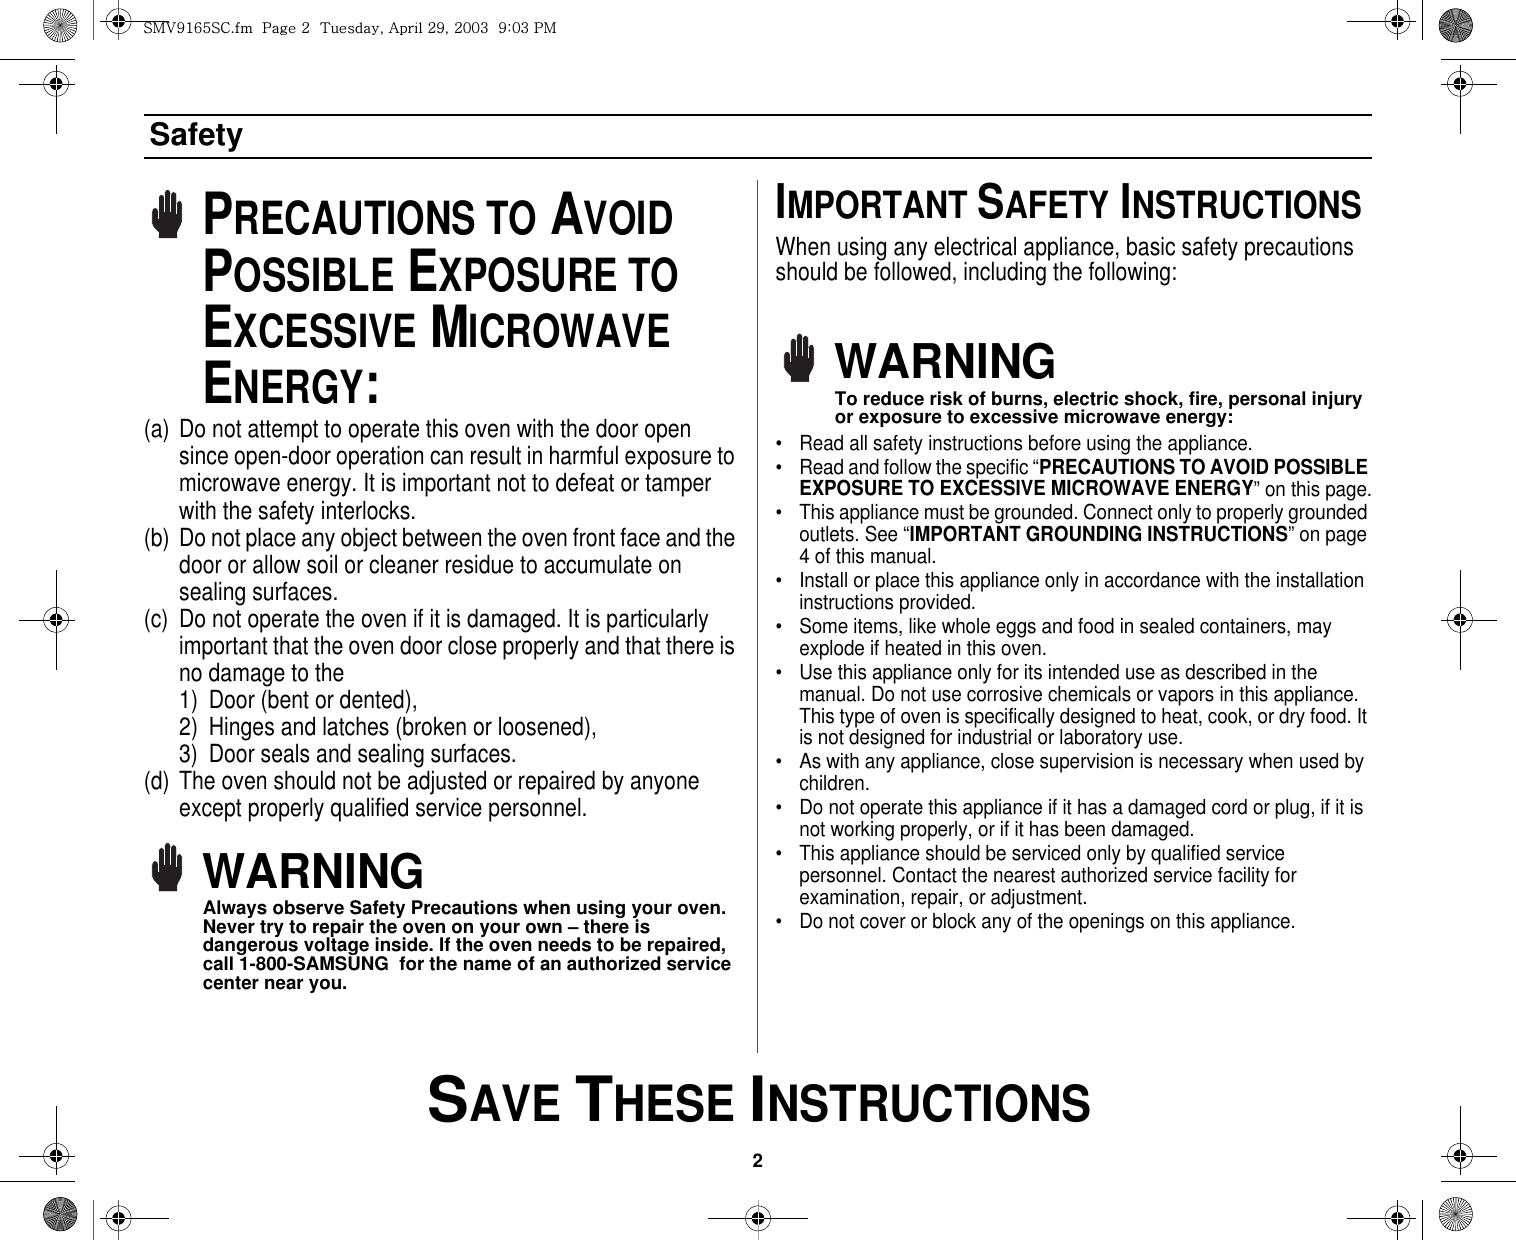 2 SAVE THESE INSTRUCTIONSSafetyPRECAUTIONS TO AVOID POSSIBLE EXPOSURE TO EXCESSIVE MICROWAVE ENERGY:(a) Do not attempt to operate this oven with the door open since open-door operation can result in harmful exposure to microwave energy. It is important not to defeat or tamper with the safety interlocks.(b) Do not place any object between the oven front face and the door or allow soil or cleaner residue to accumulate on sealing surfaces.(c) Do not operate the oven if it is damaged. It is particularly important that the oven door close properly and that there is no damage to the 1) Door (bent or dented), 2) Hinges and latches (broken or loosened), 3) Door seals and sealing surfaces.(d) The oven should not be adjusted or repaired by anyone except properly qualified service personnel.WARNINGAlways observe Safety Precautions when using your oven. Never try to repair the oven on your own – there is dangerous voltage inside. If the oven needs to be repaired, call 1-800-SAMSUNG  for the name of an authorized service center near you.IMPORTANT SAFETY INSTRUCTIONSWhen using any electrical appliance, basic safety precautions should be followed, including the following:WARNINGTo reduce risk of burns, electric shock, fire, personal injury or exposure to excessive microwave energy:• Read all safety instructions before using the appliance.• Read and follow the specific “PRECAUTIONS TO AVOID POSSIBLE EXPOSURE TO EXCESSIVE MICROWAVE ENERGY” on this page.• This appliance must be grounded. Connect only to properly grounded outlets. See “IMPORTANT GROUNDING INSTRUCTIONS” on page 4 of this manual. • Install or place this appliance only in accordance with the installation instructions provided.• Some items, like whole eggs and food in sealed containers, may explode if heated in this oven.• Use this appliance only for its intended use as described in the manual. Do not use corrosive chemicals or vapors in this appliance. This type of oven is specifically designed to heat, cook, or dry food. It is not designed for industrial or laboratory use.• As with any appliance, close supervision is necessary when used by children.• Do not operate this appliance if it has a damaged cord or plug, if it is not working properly, or if it has been damaged.• This appliance should be serviced only by qualified service personnel. Contact the nearest authorized service facility for examination, repair, or adjustment.• Do not cover or block any of the openings on this appliance.zt}`X]\zjUGGwGYGG{SGhGY`SGYWWZGG`aWZGwt